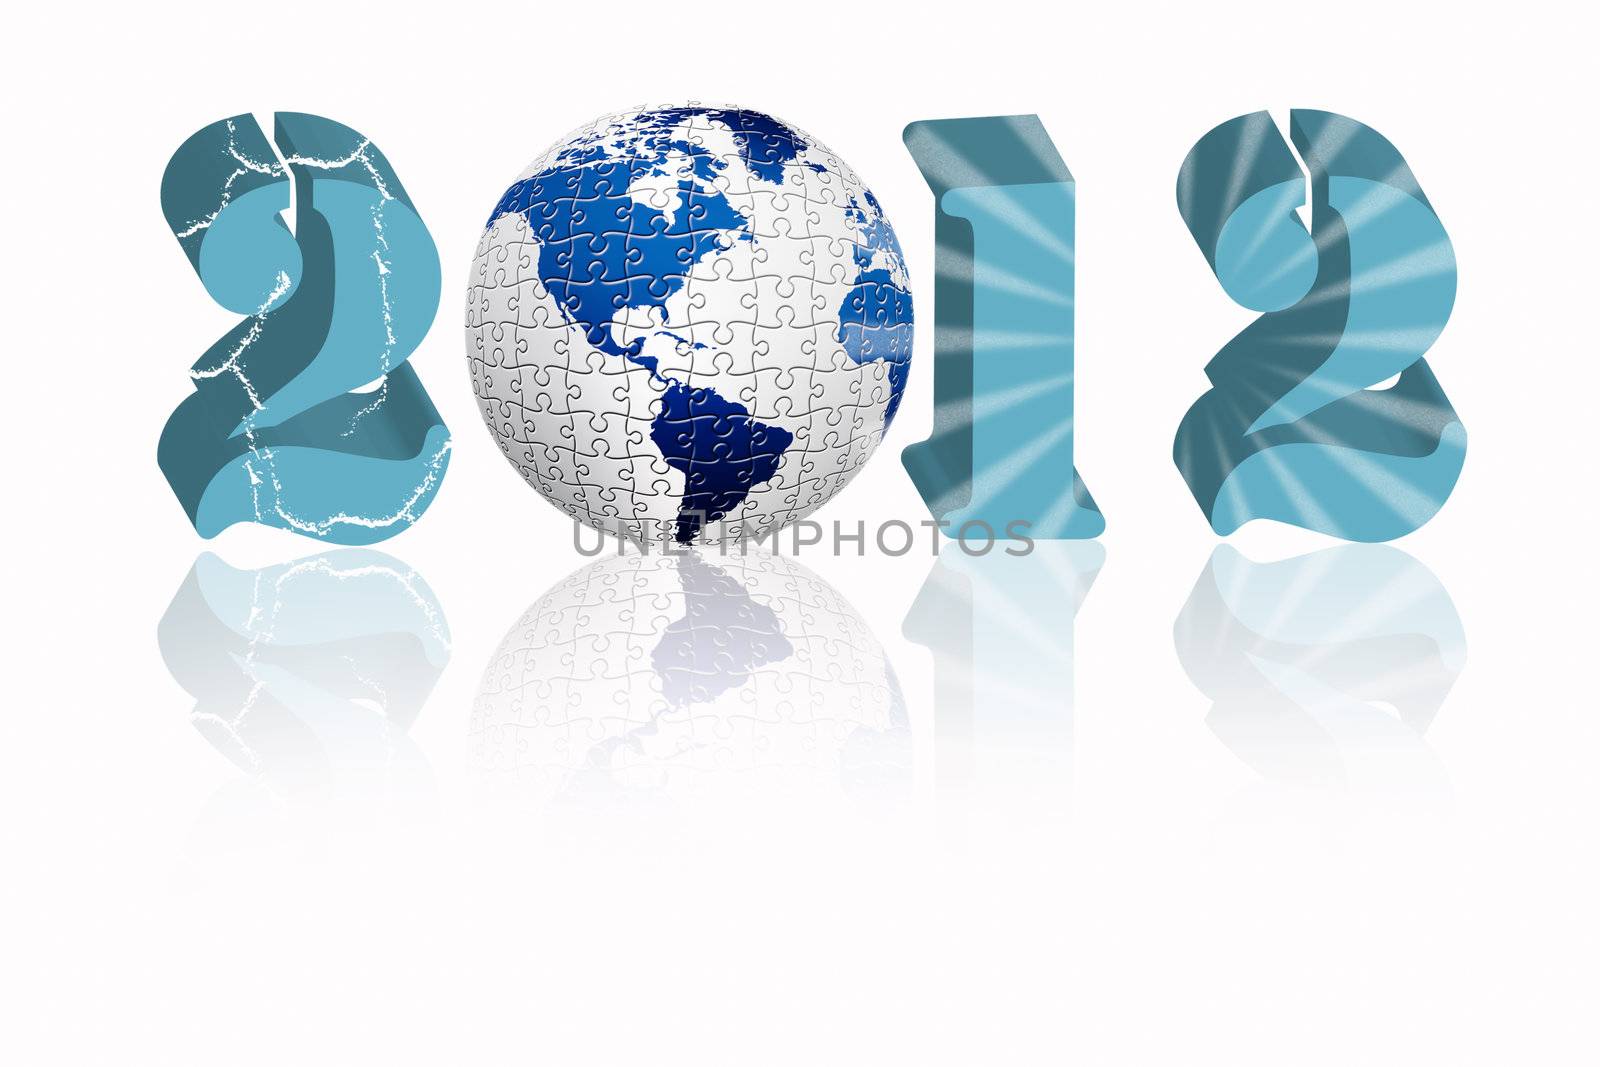 Creative 2012 New Year concept with blue Earth globe isolated on white reflective background